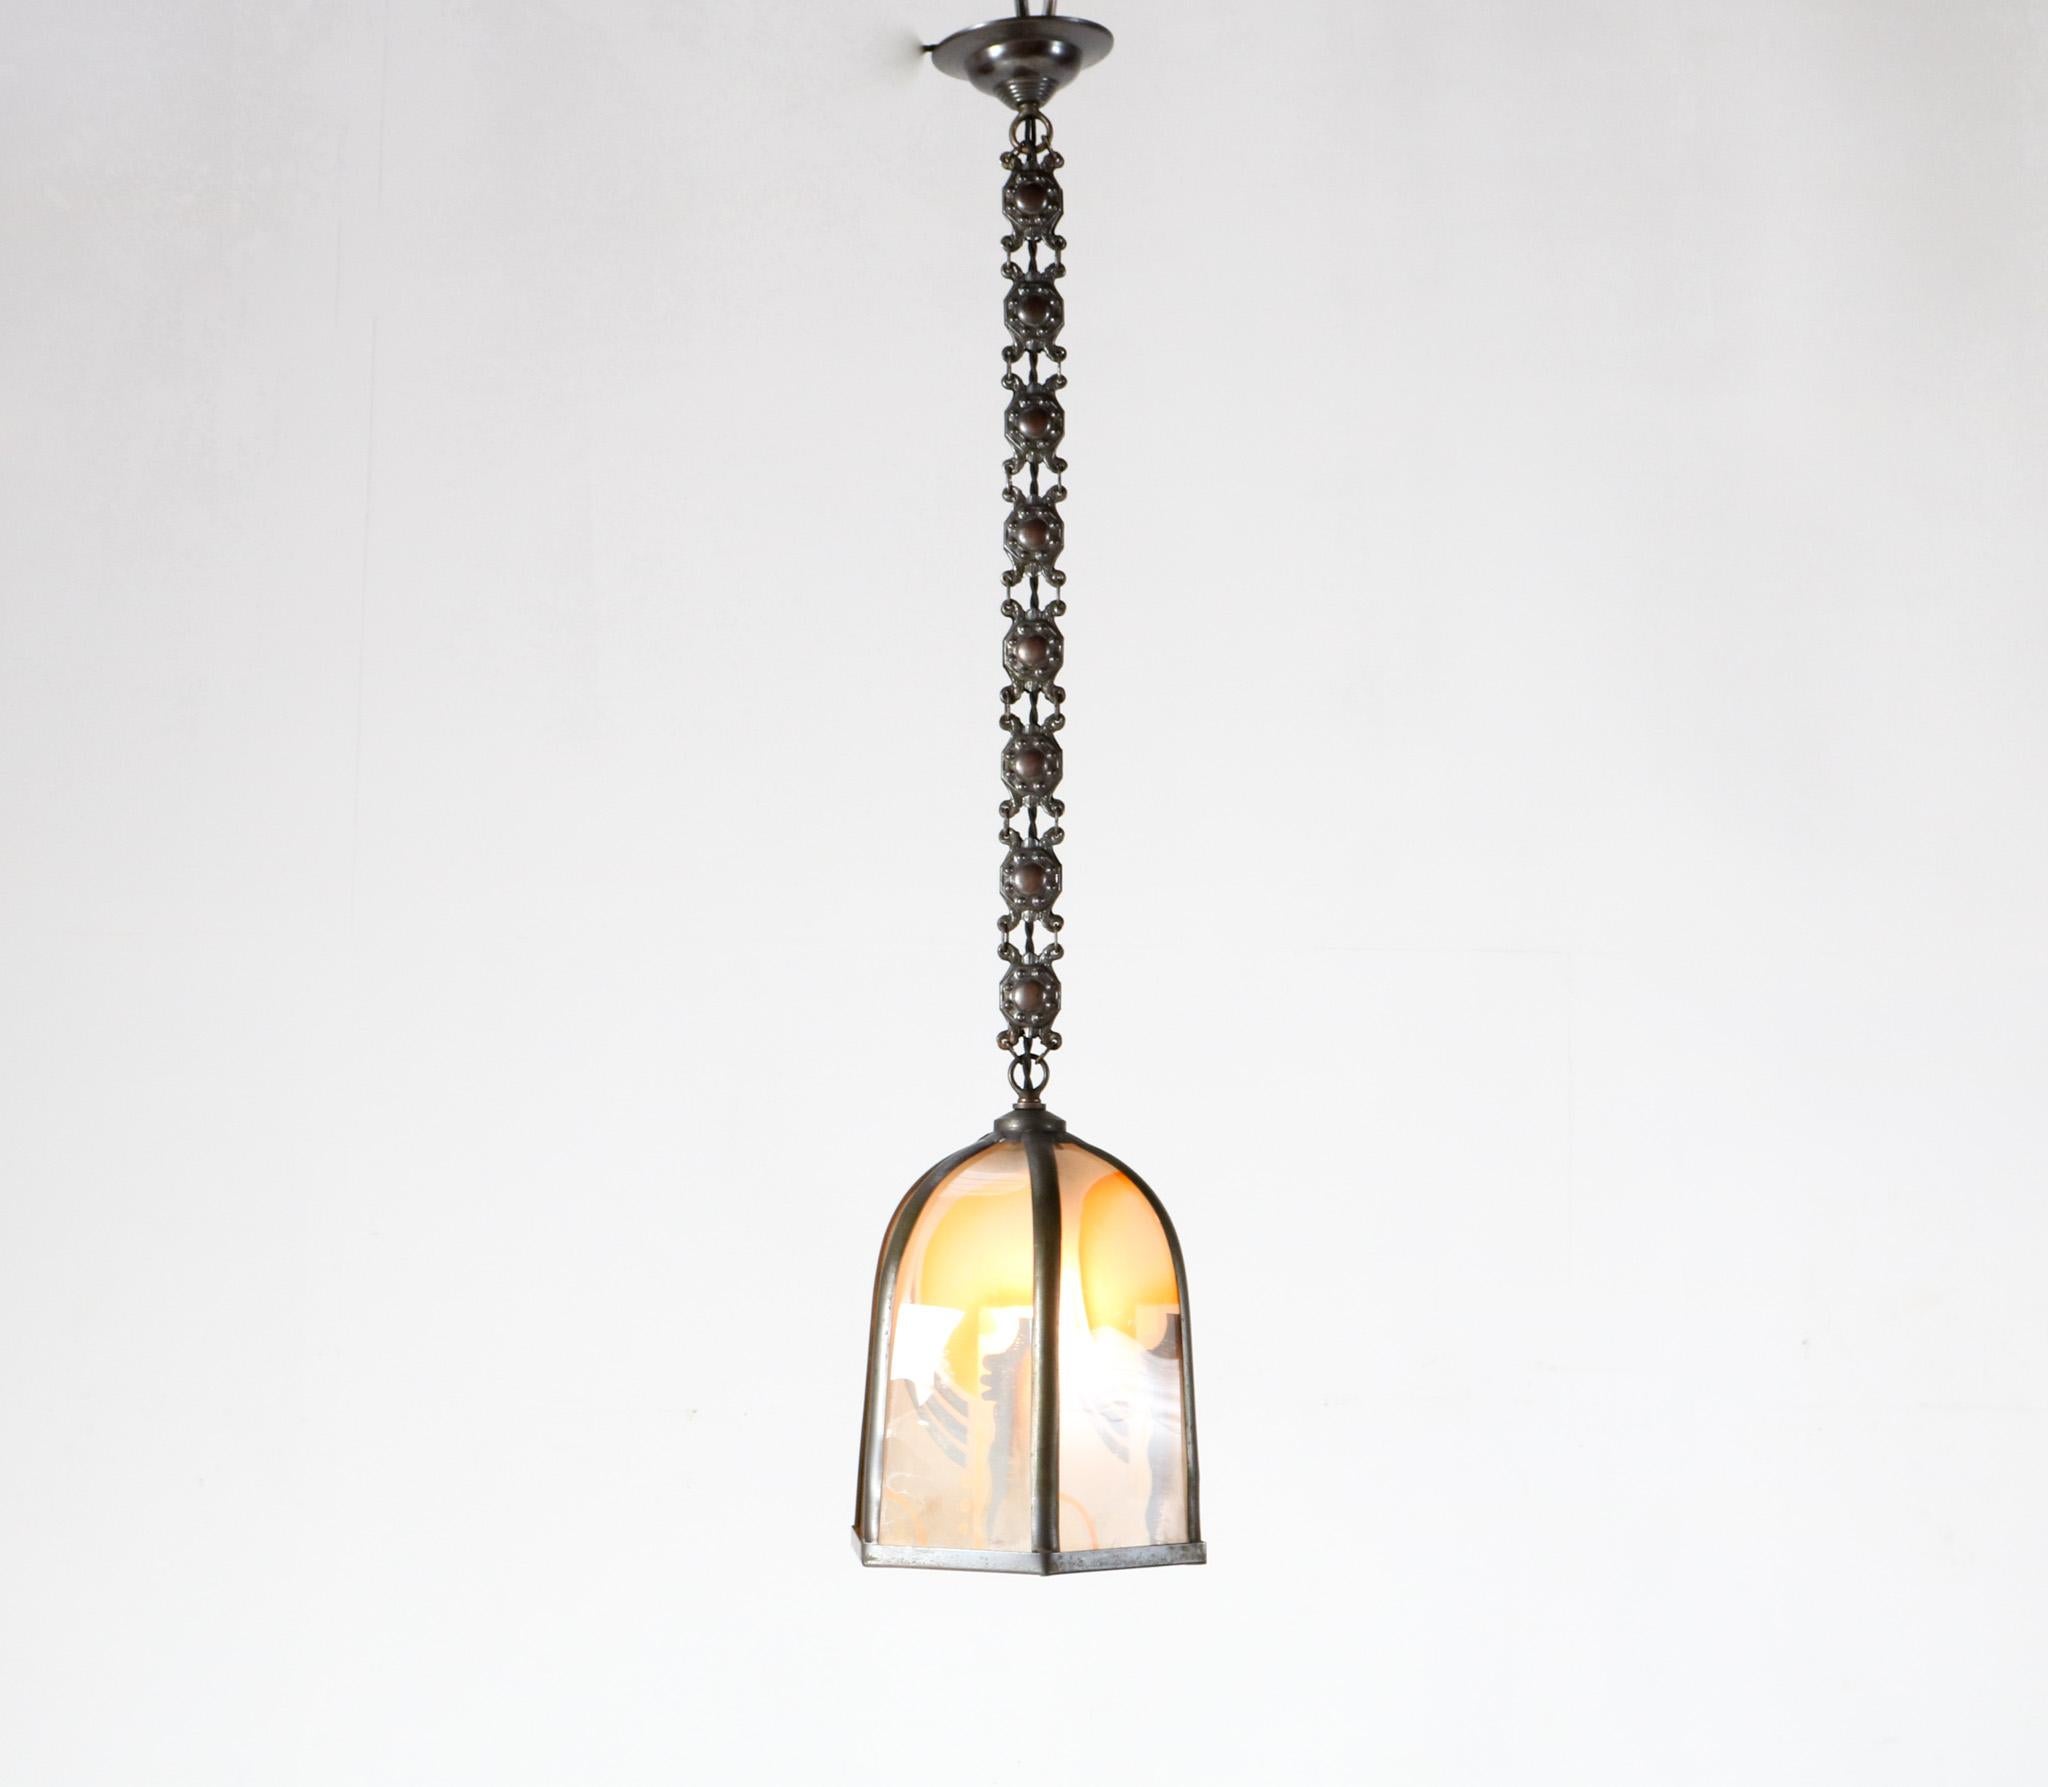  Art Deco Amsterdamse School Patinated Brass Pendant Lamp, 1920s For Sale 1